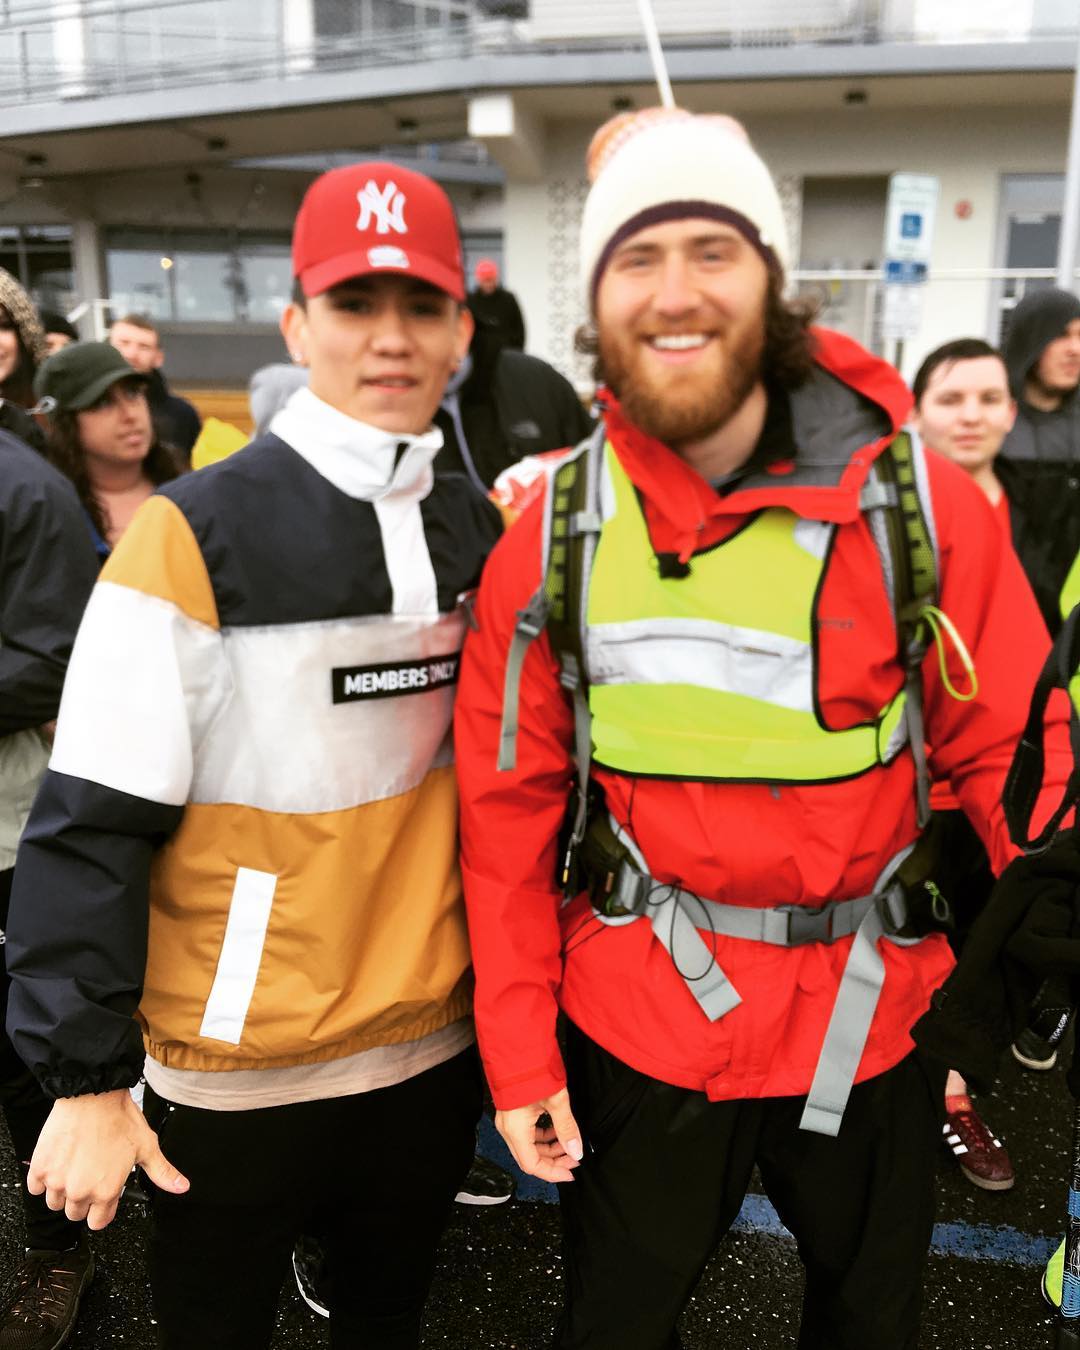 Mike Posner in Asbury Park, NJ on April 15, 2019
Photo credit: instagram.com/ebeofficiall
